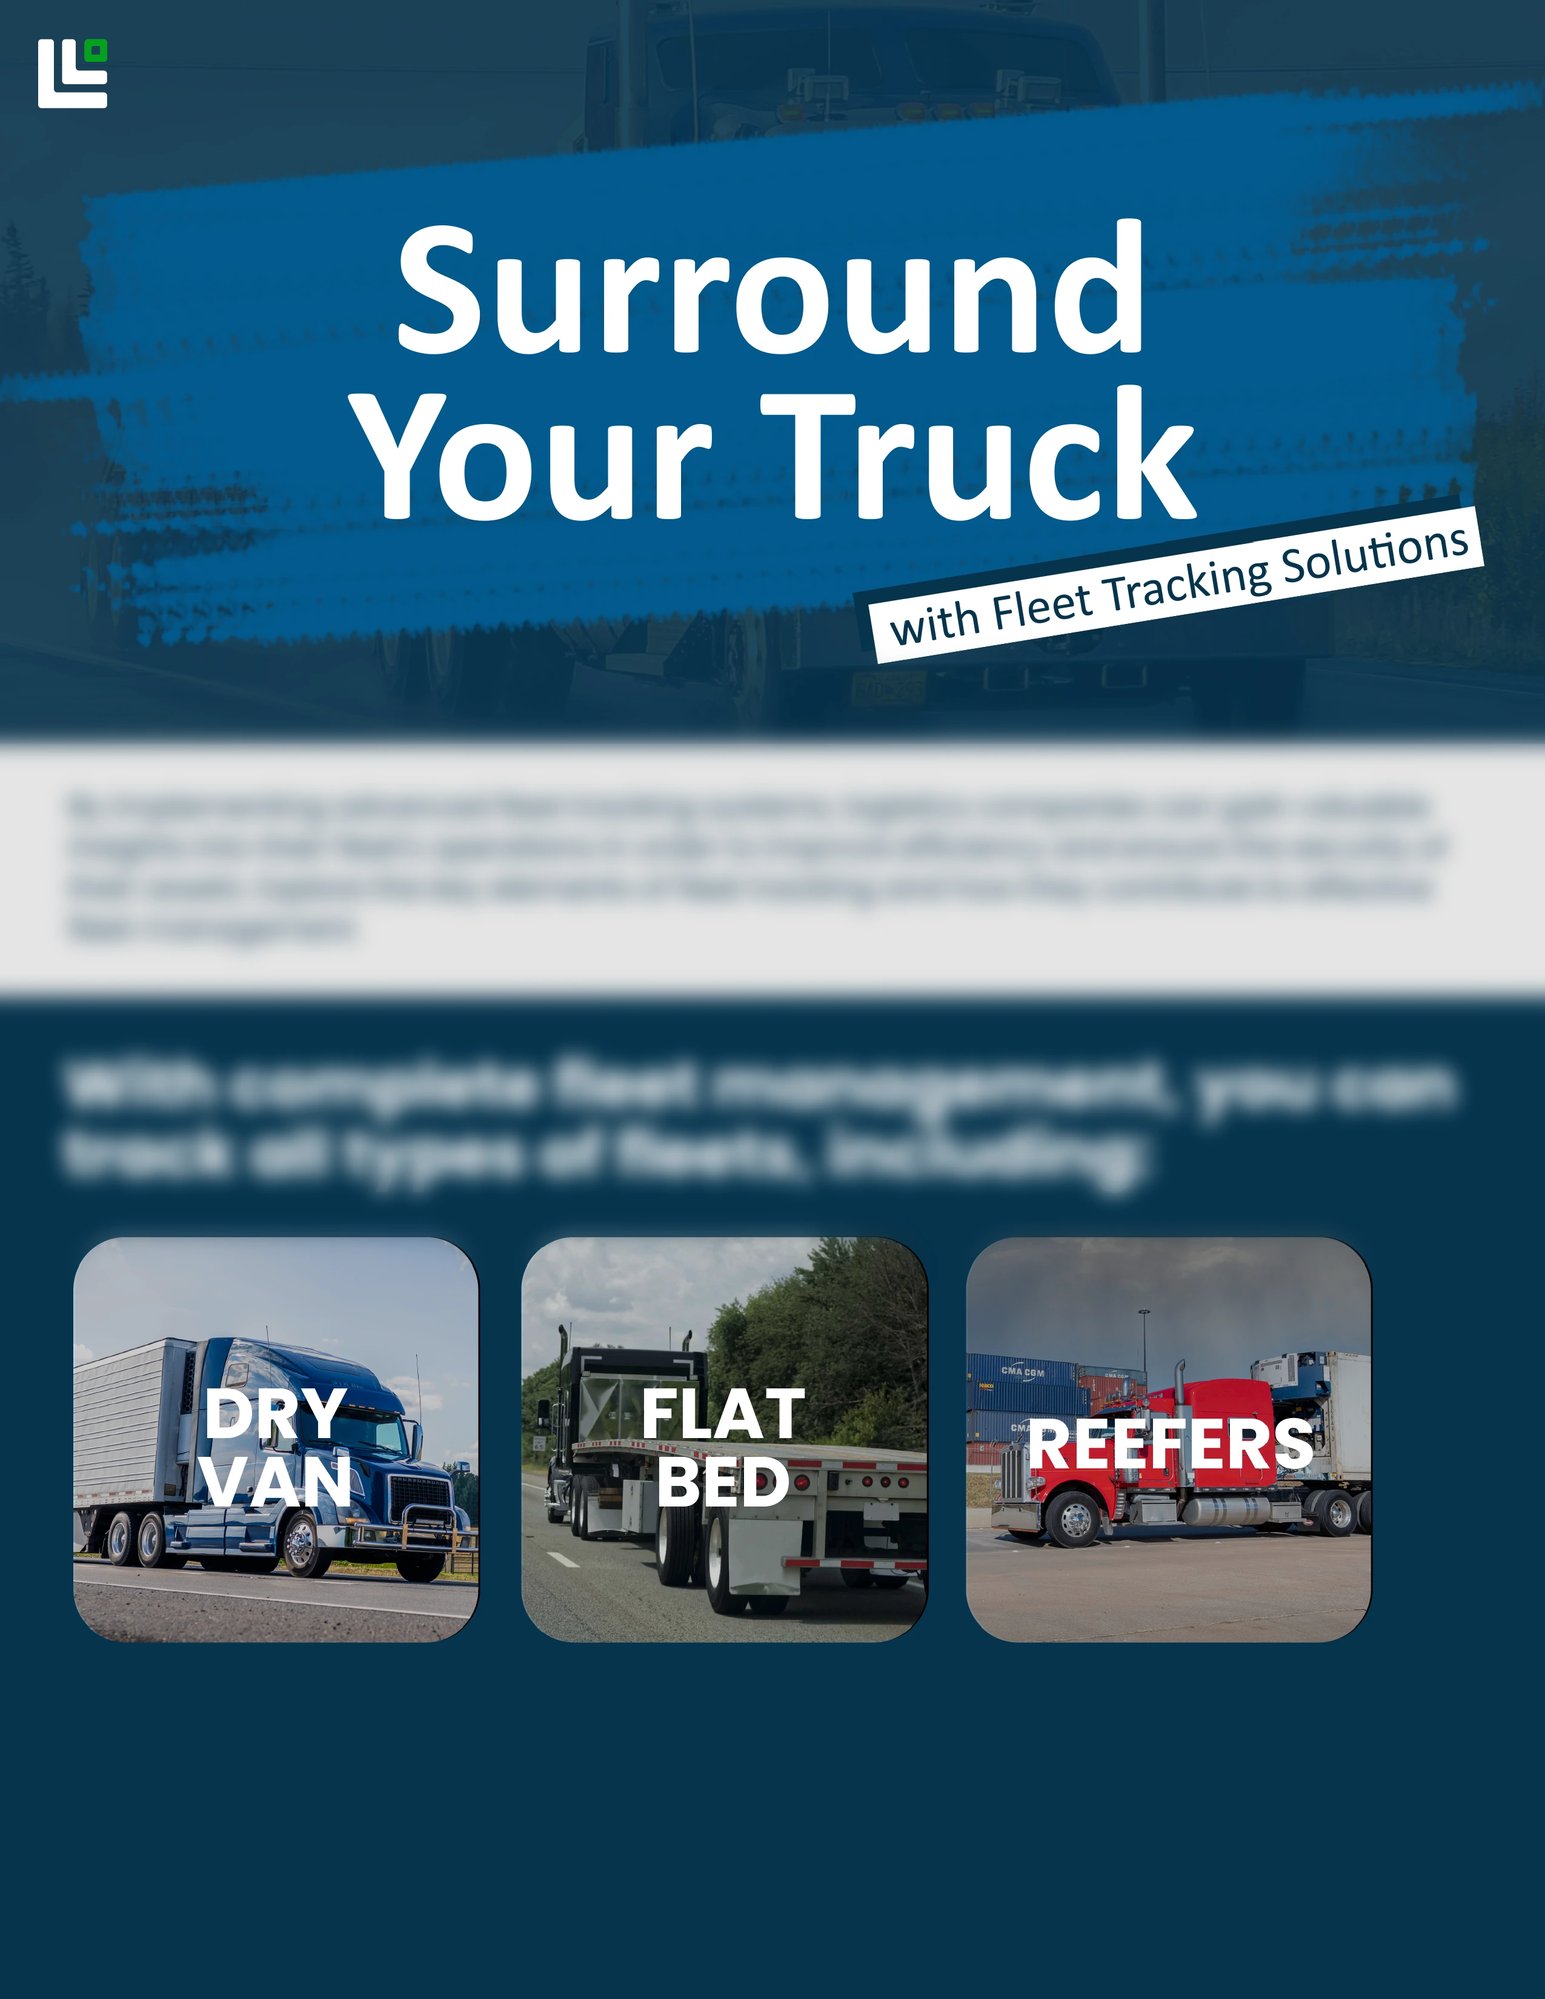 Surround your truck